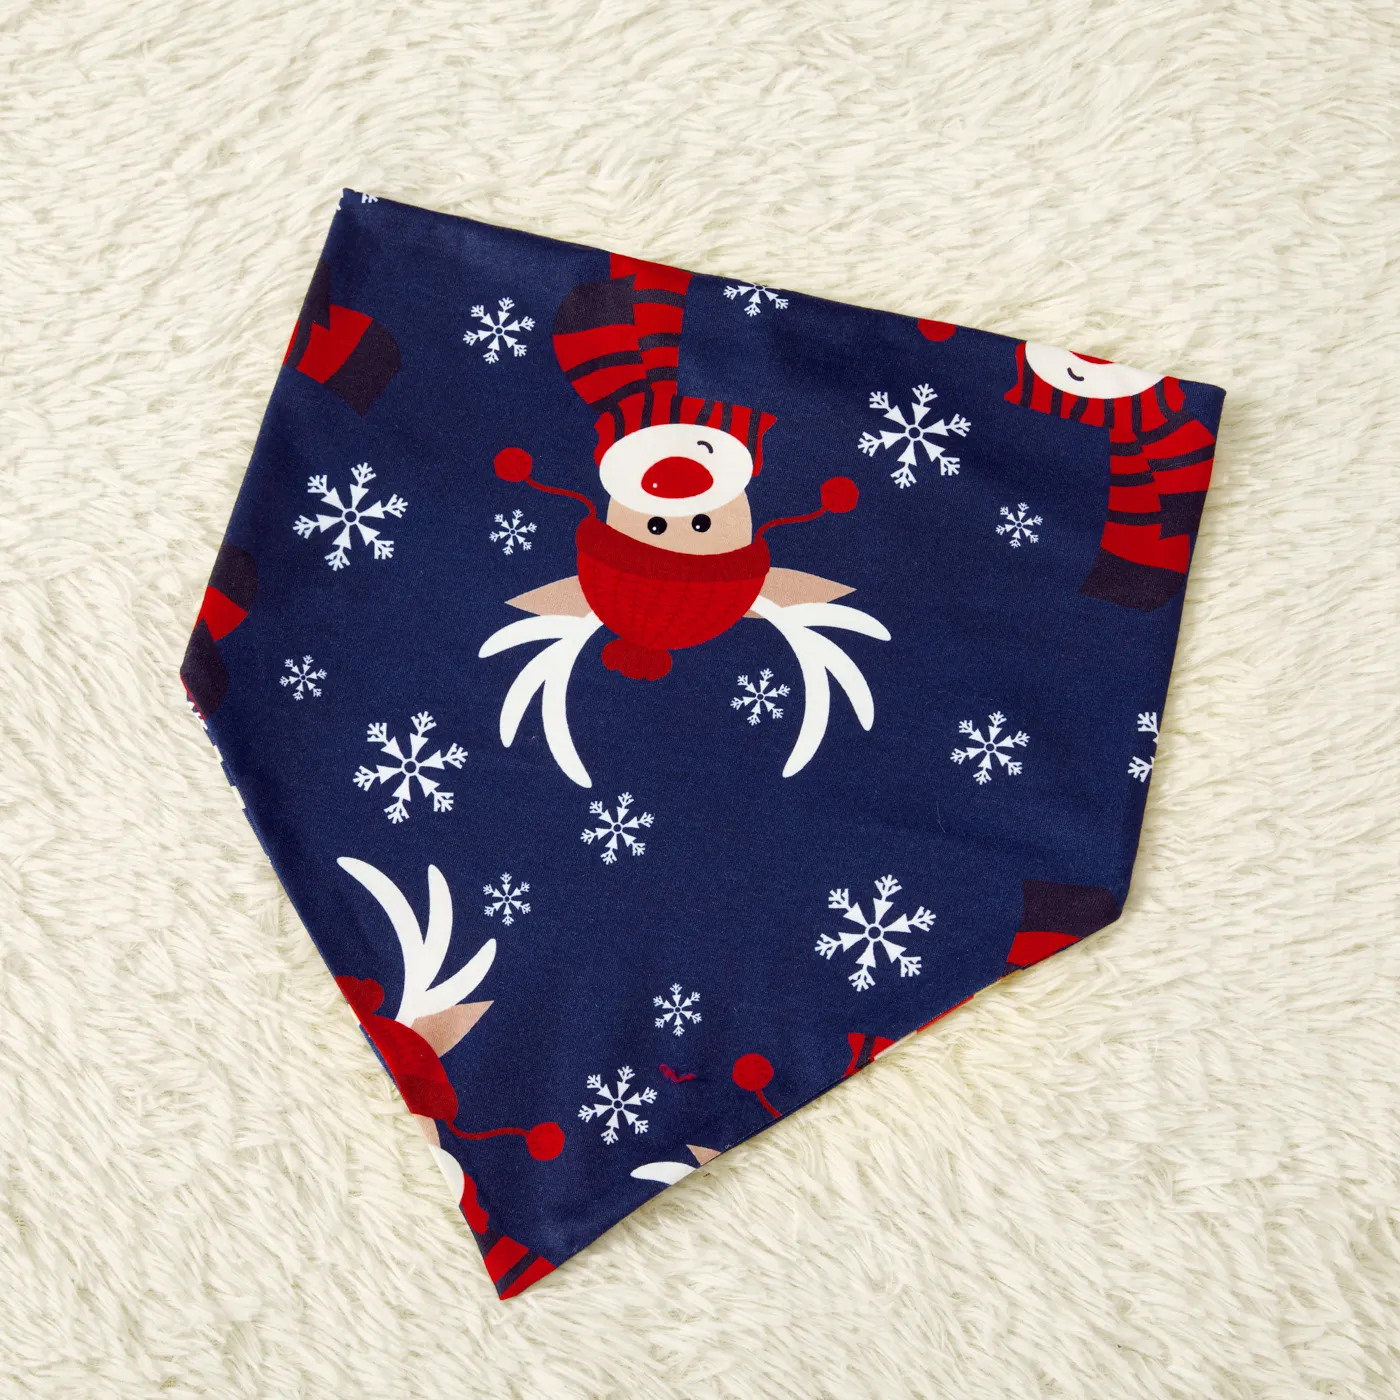 Merry Xmas Letters And Reindeer Print Navy Family Matching Long-sleeve Pajamas Sets (Flame Resistant)